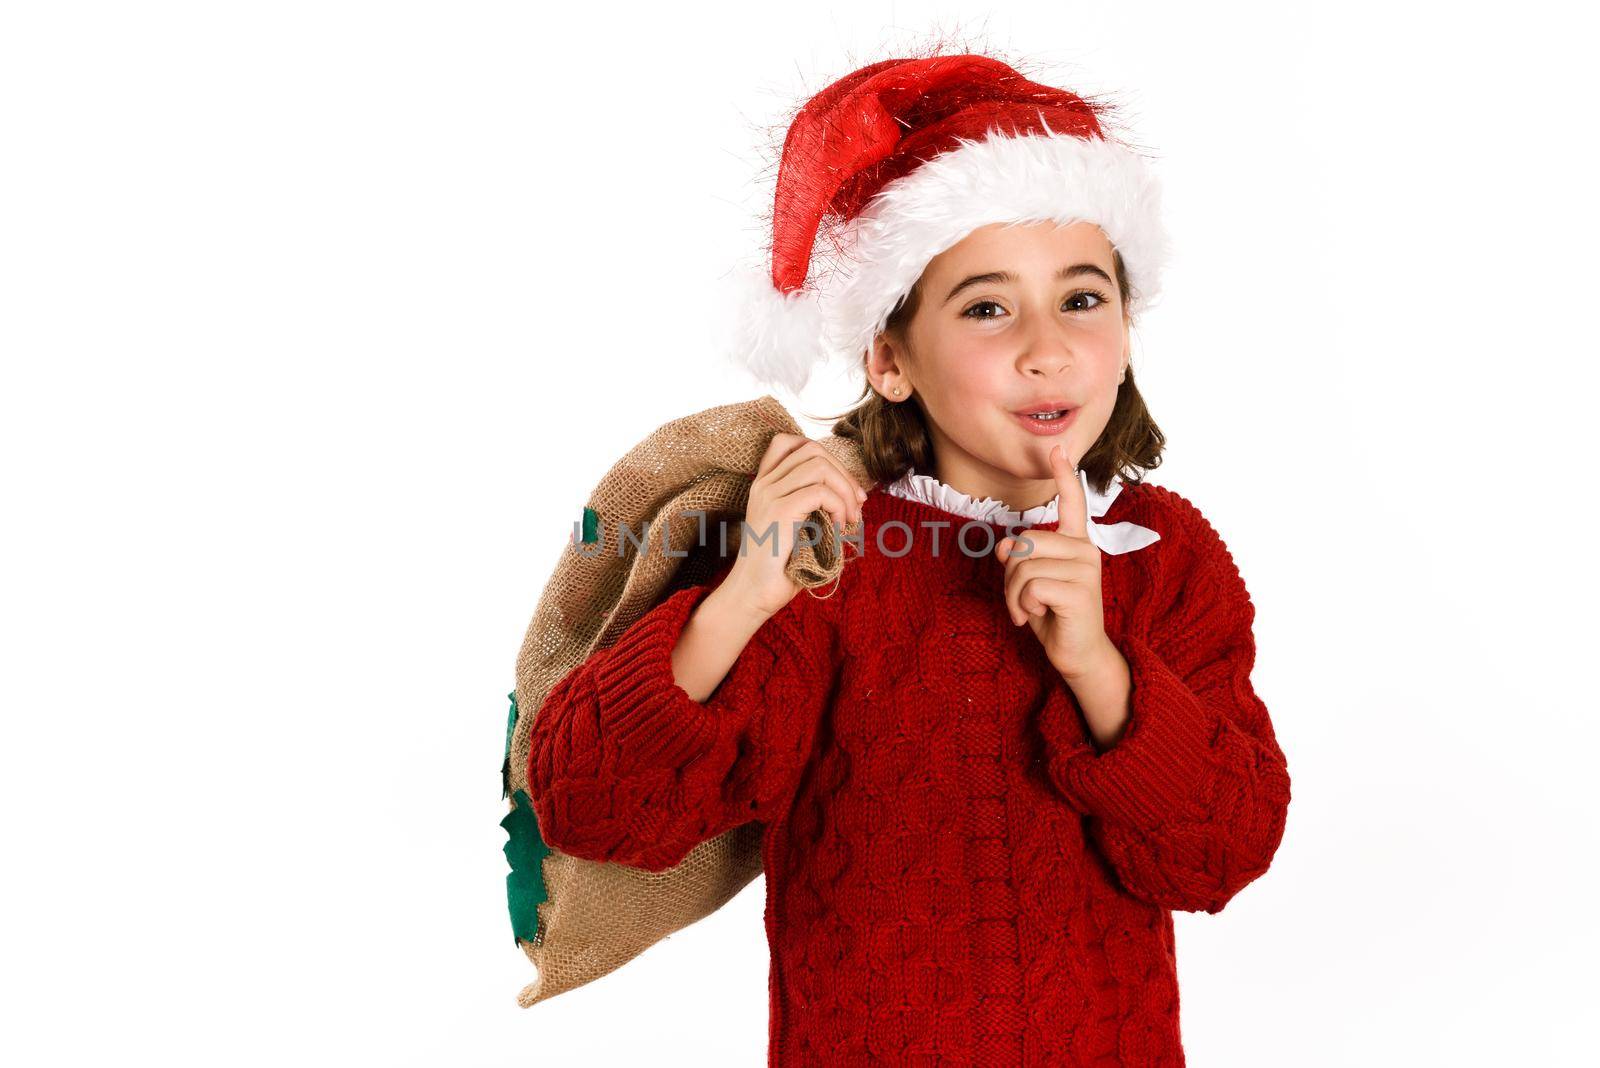 Adorable little girl wearing santa hat carrying gift bag isolated on white background. Winter clothes for Christmas